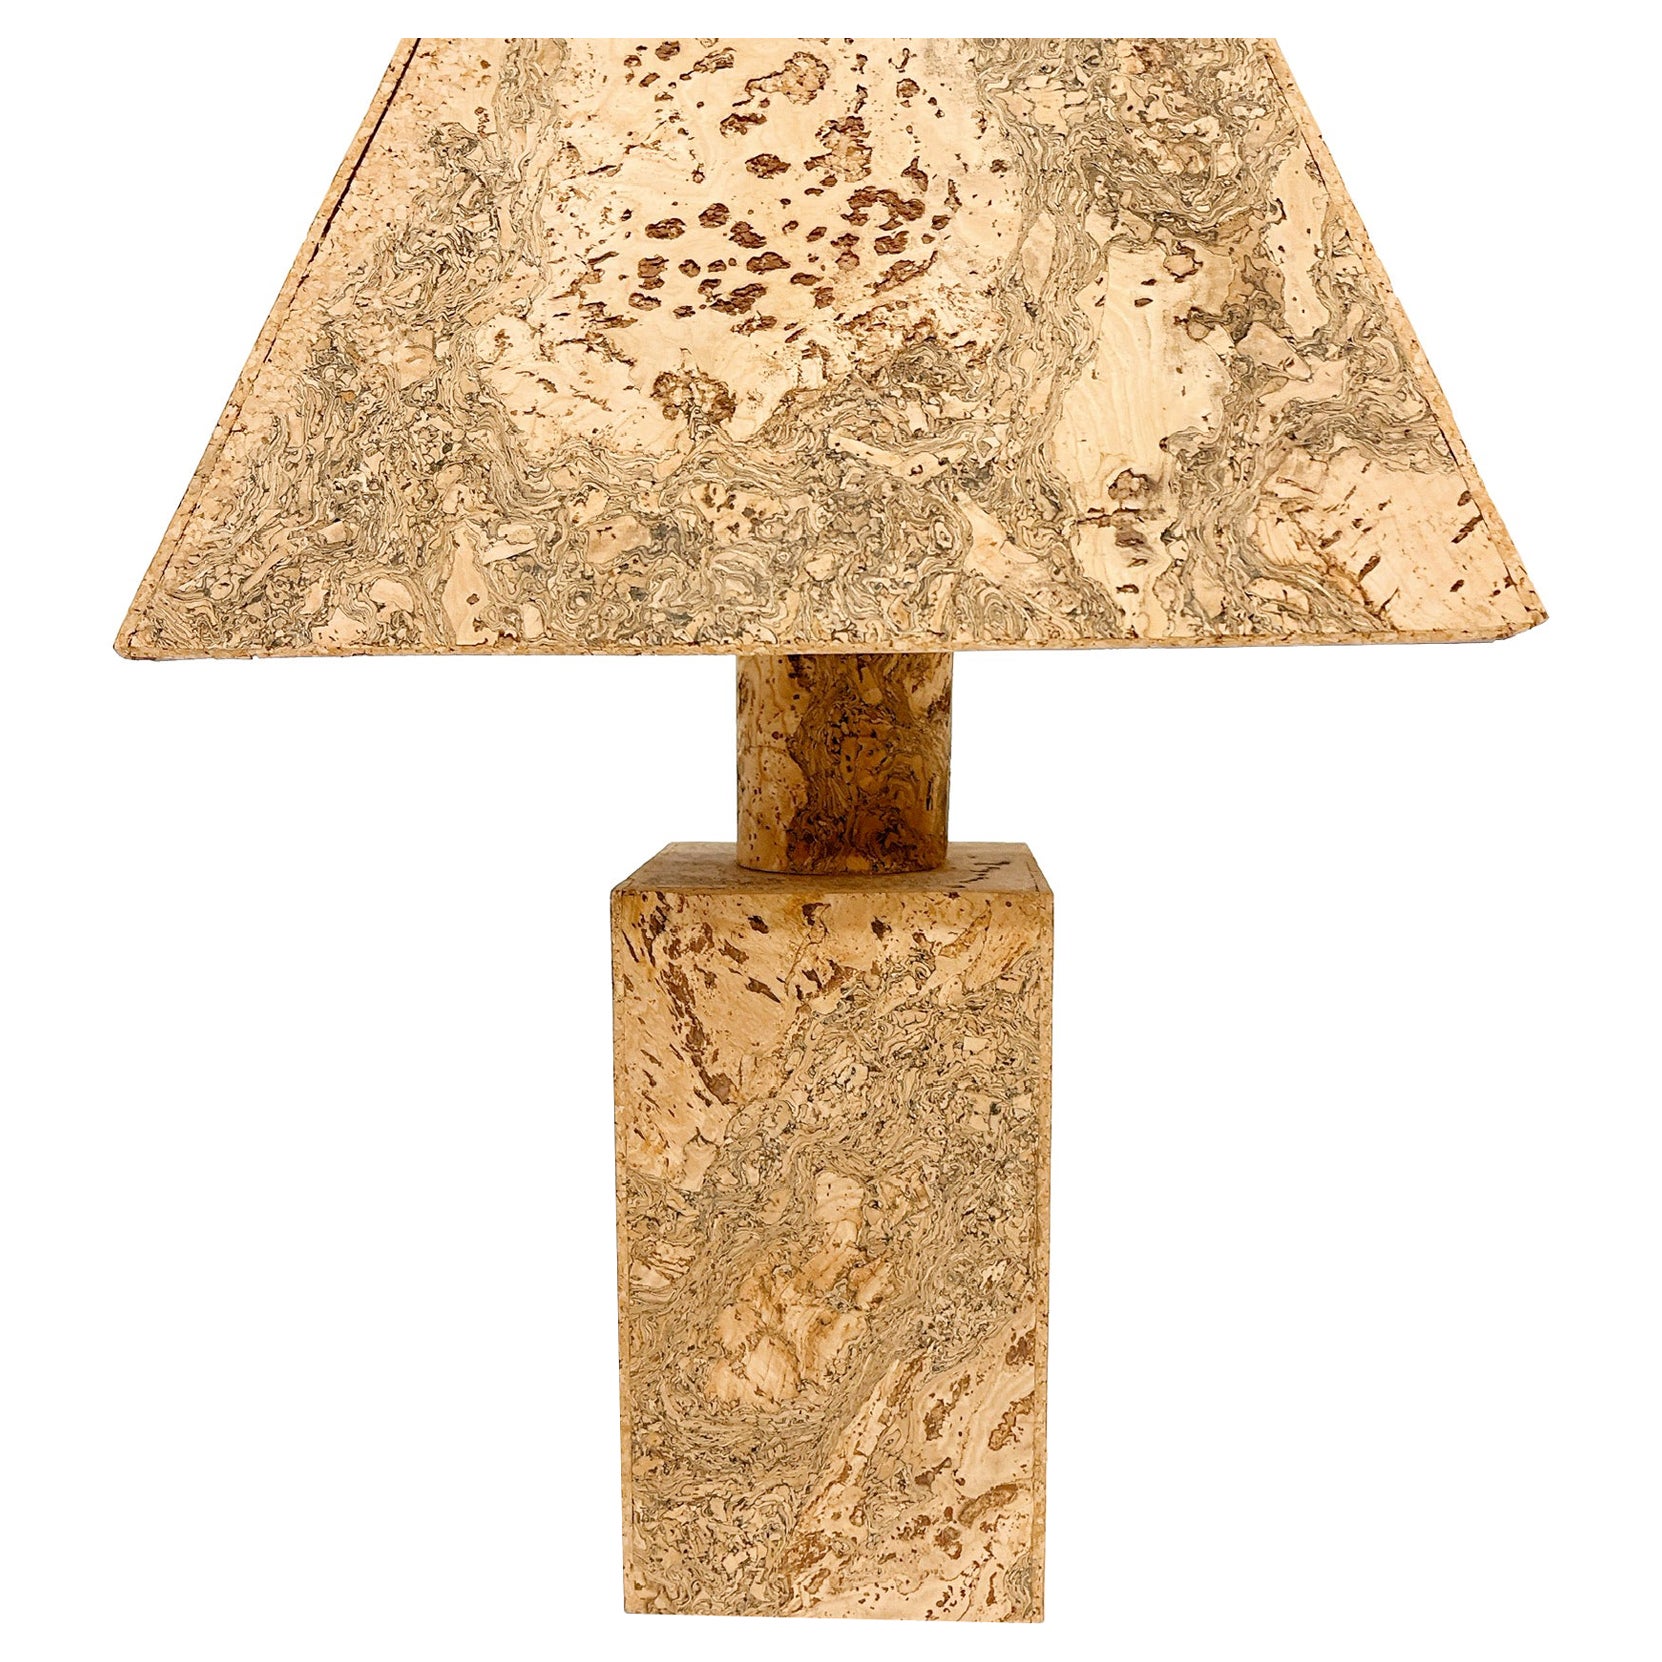 German Cork Table Lamp in the Style of Ingo Maurer, 1960s For Sale